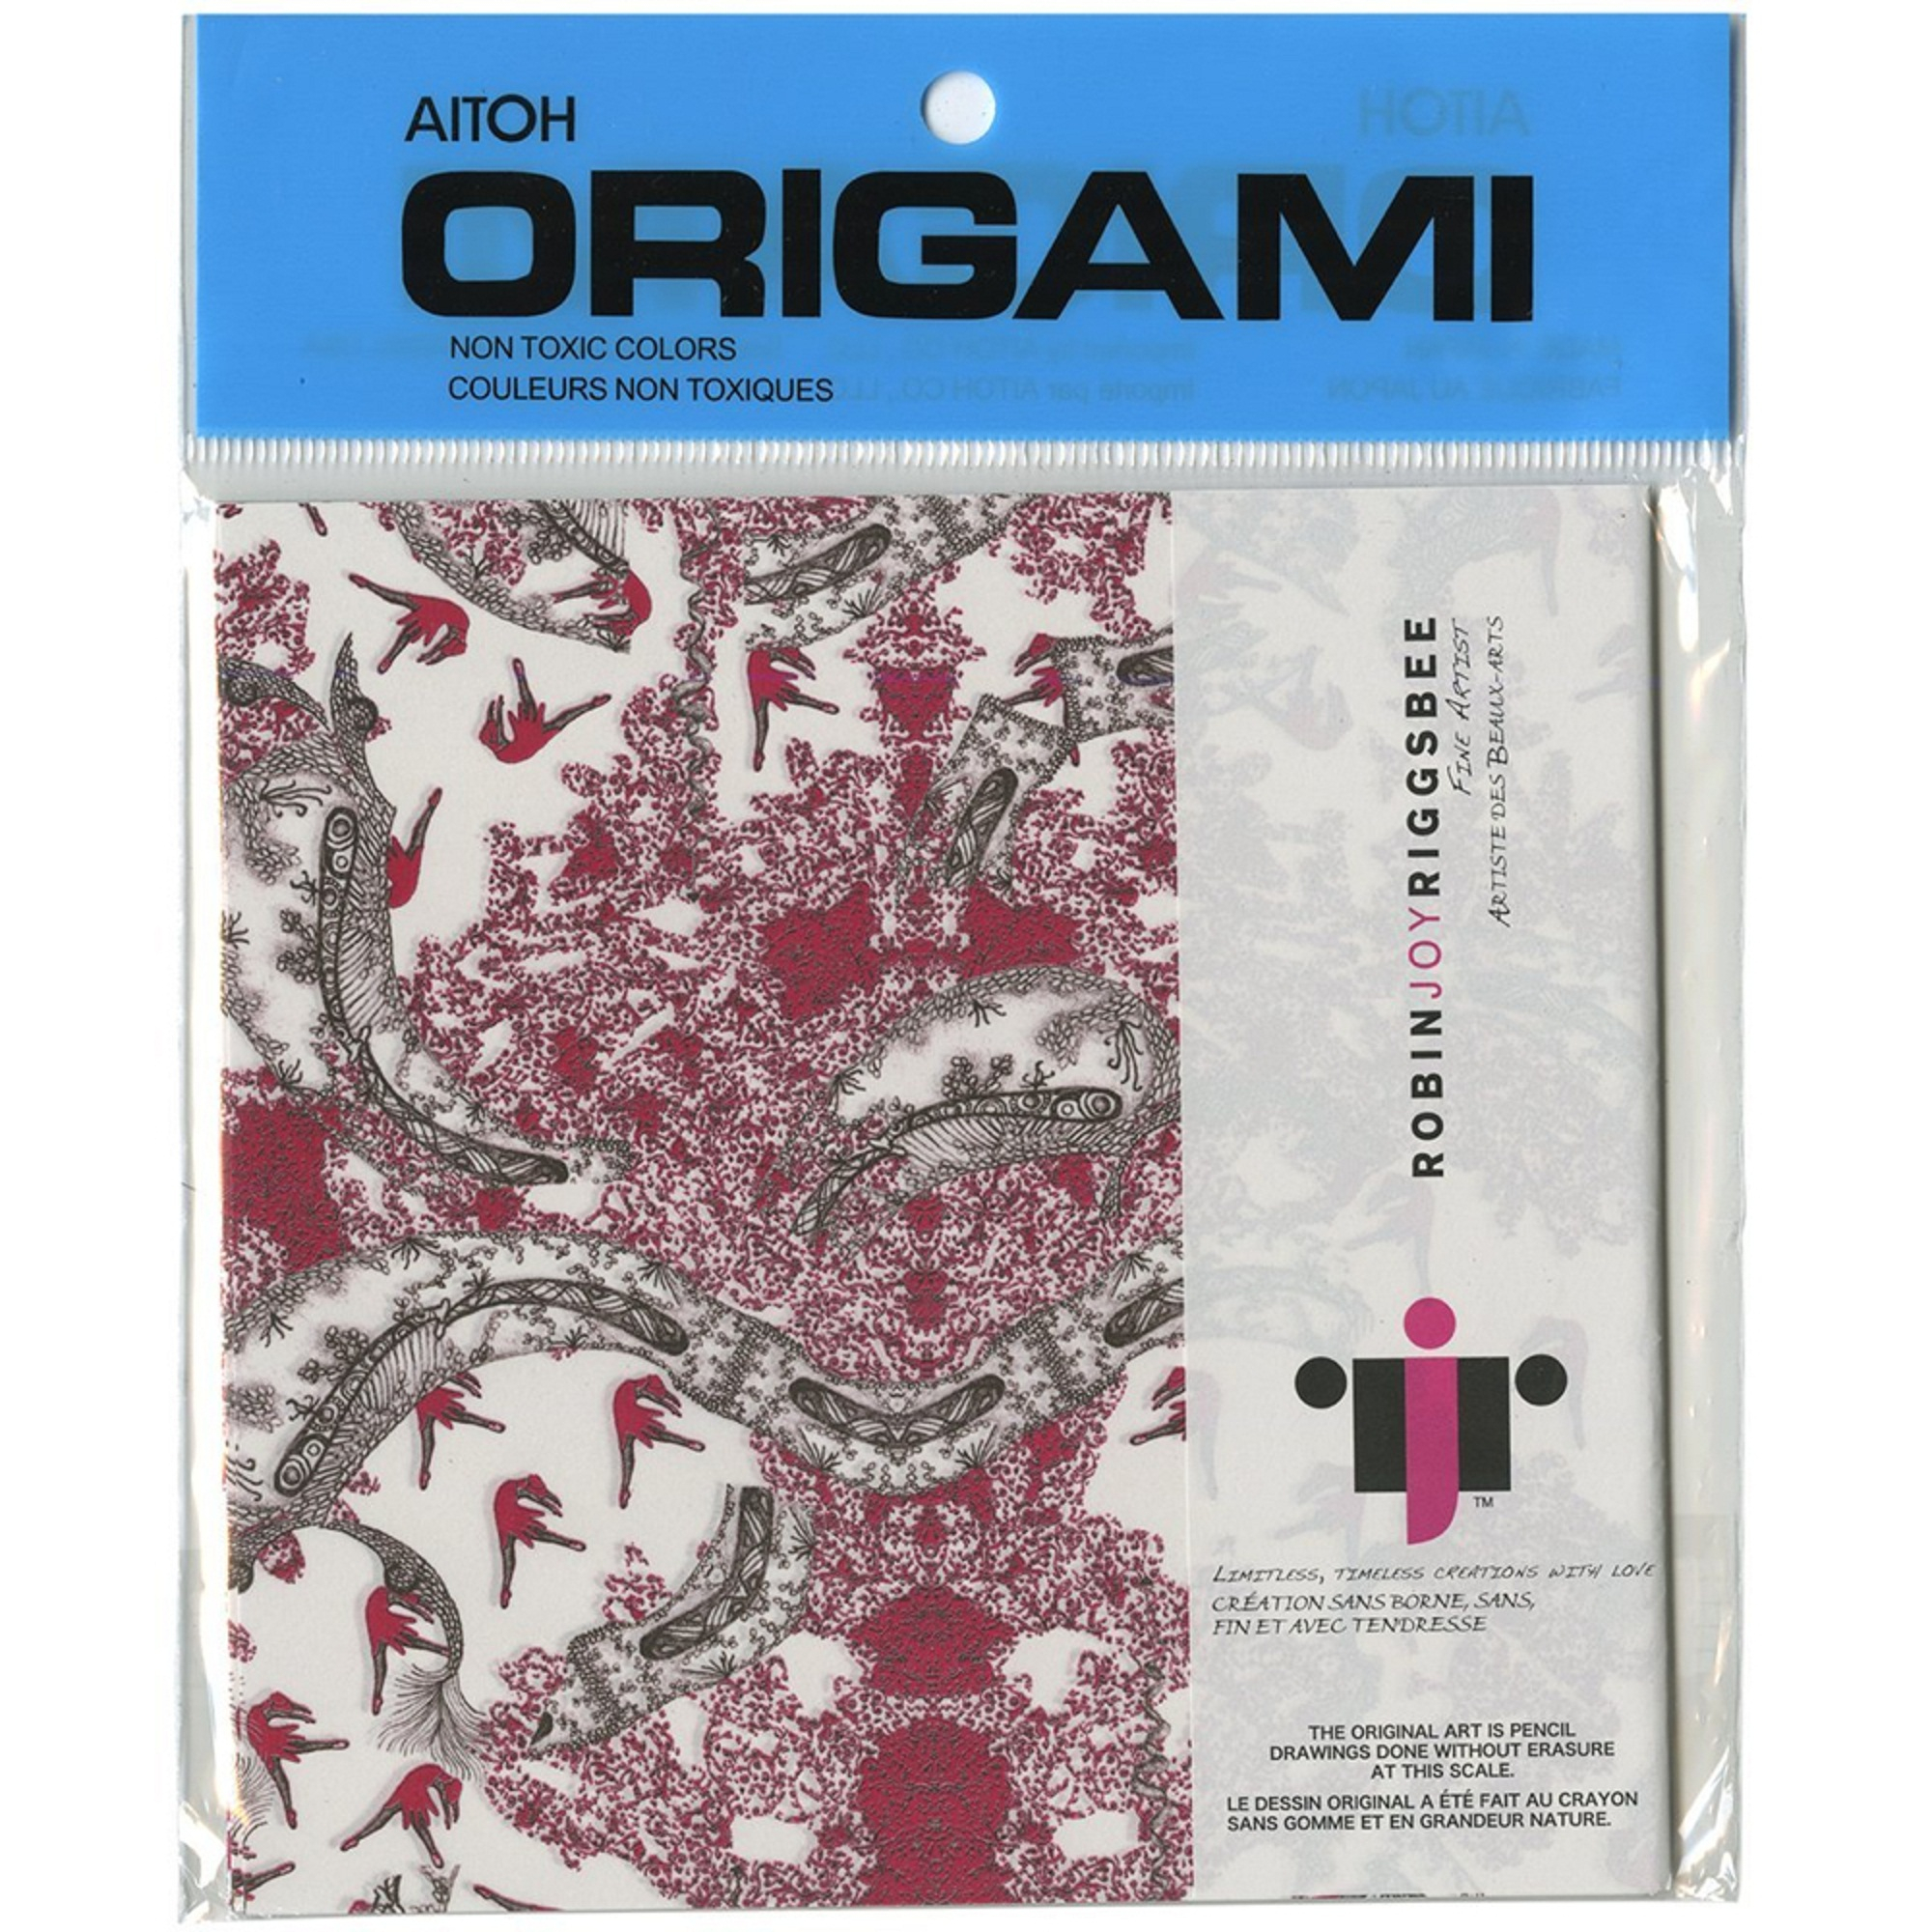 Aitoh Origami Paper Details About Aitoh Origami Paper Riggsbee Design 6 In X 6 In 20 Sheets